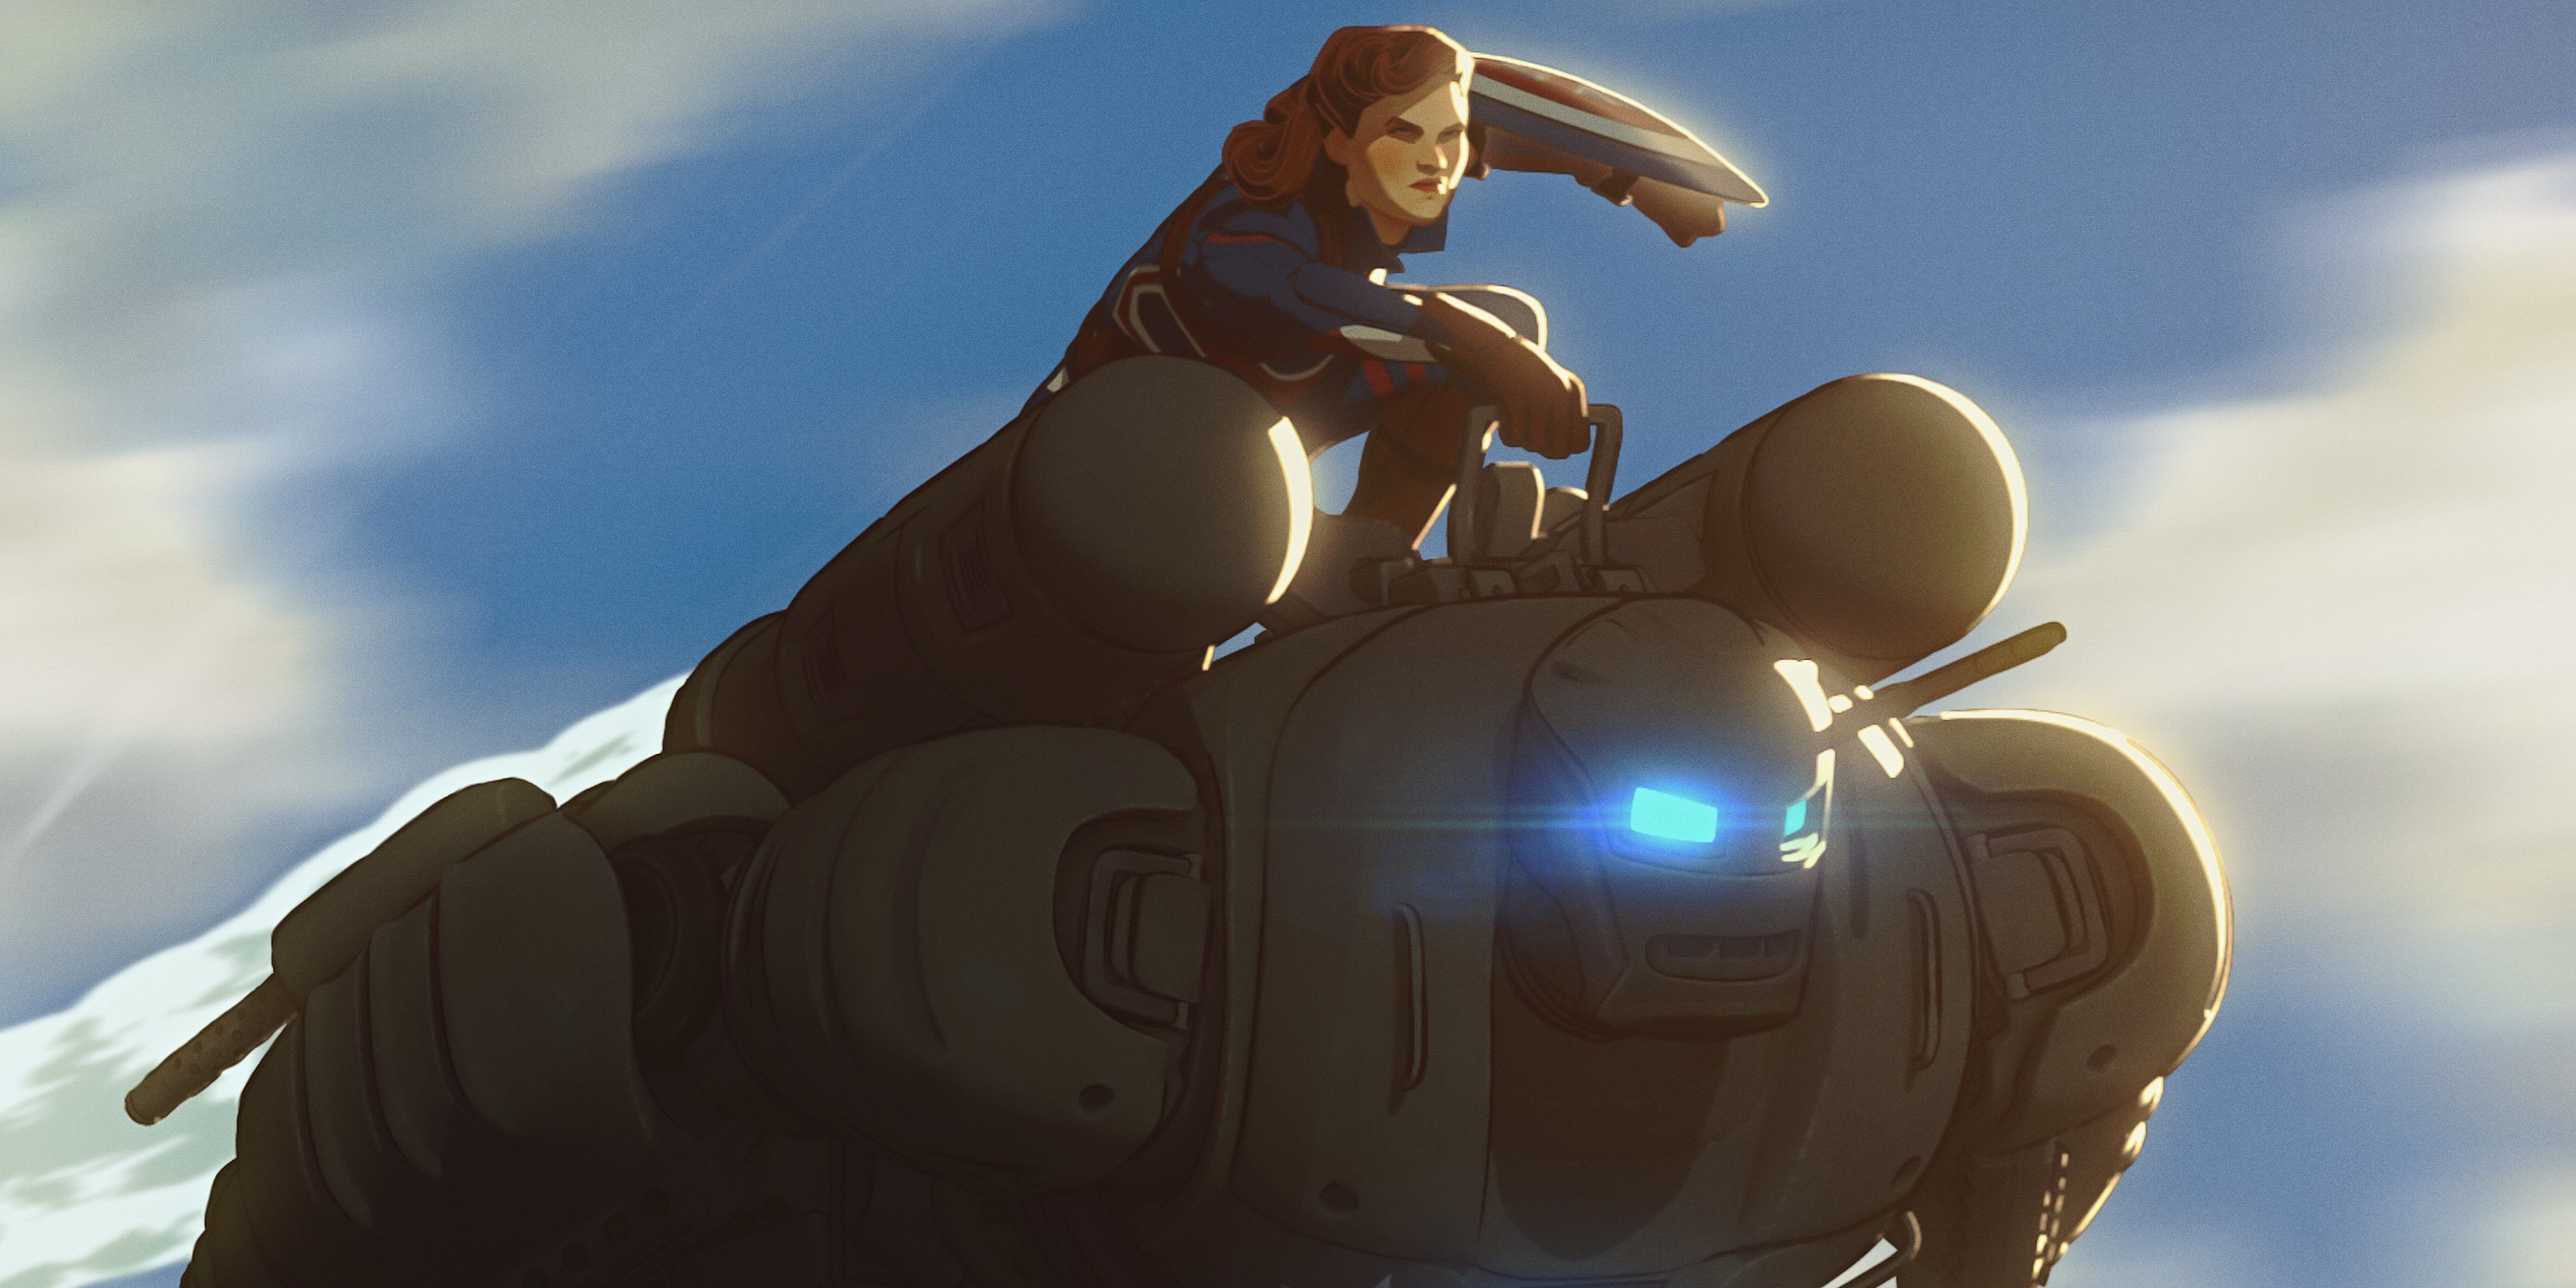 Captain Carter rides on the Hydra Stomper's back in What If